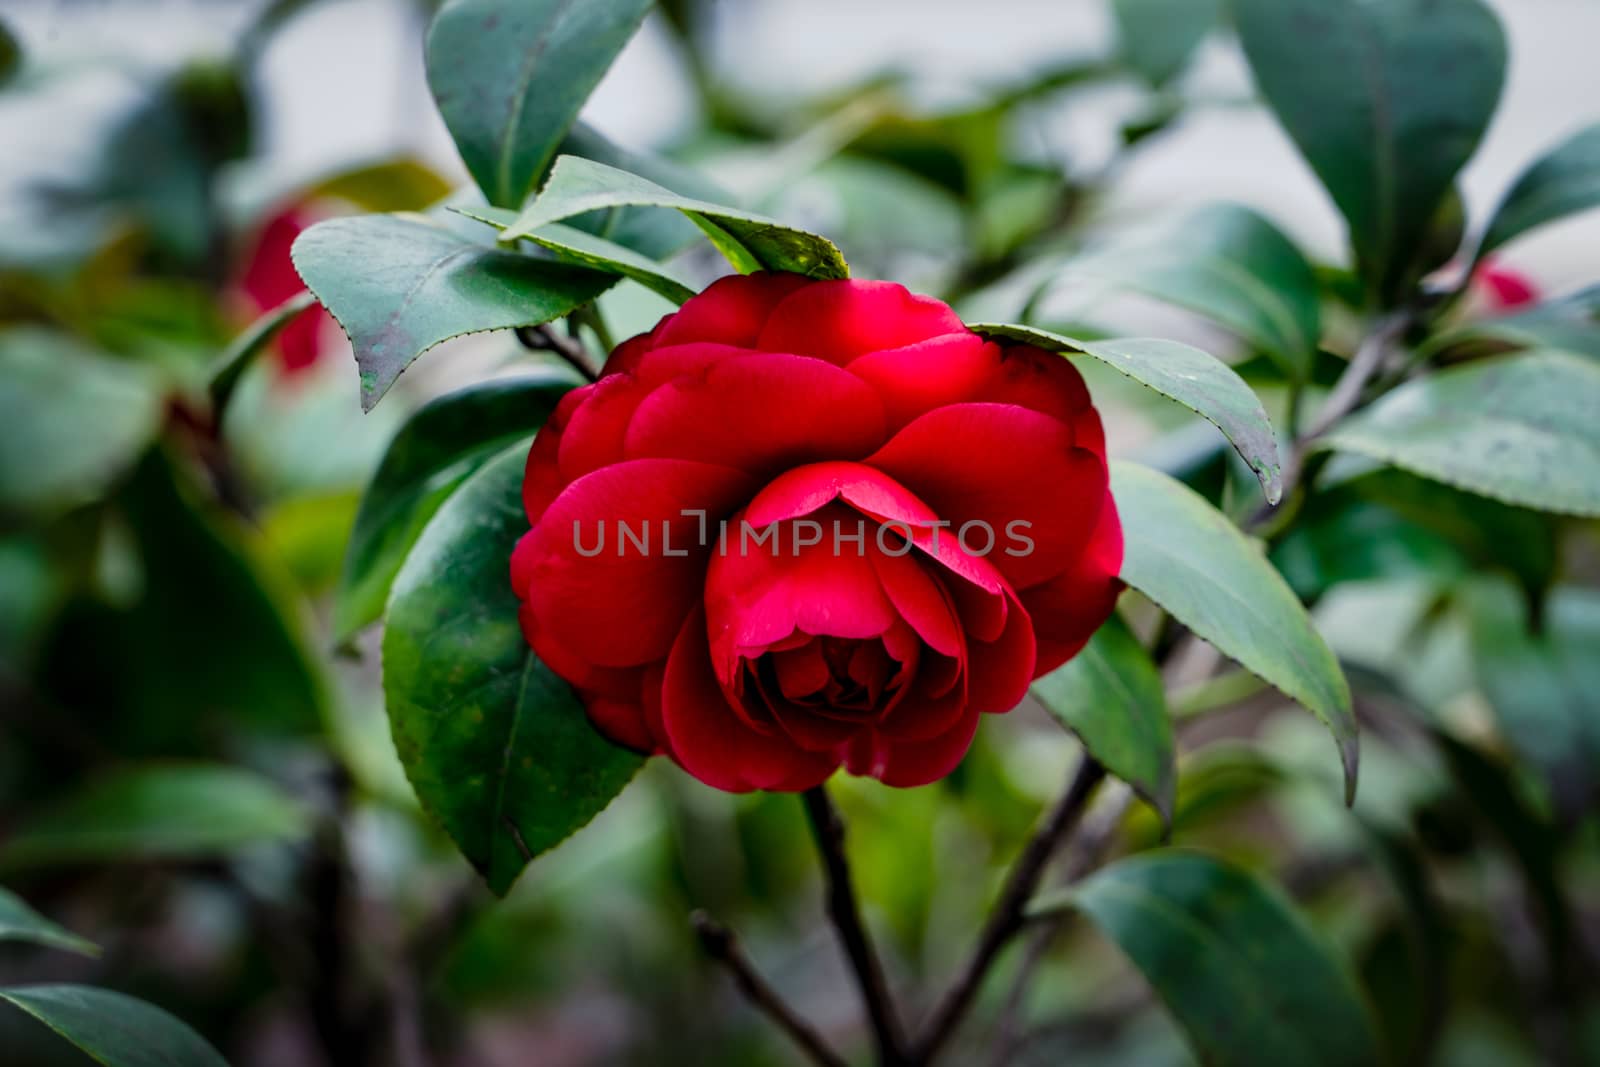 A red rose on the tree in blurred background